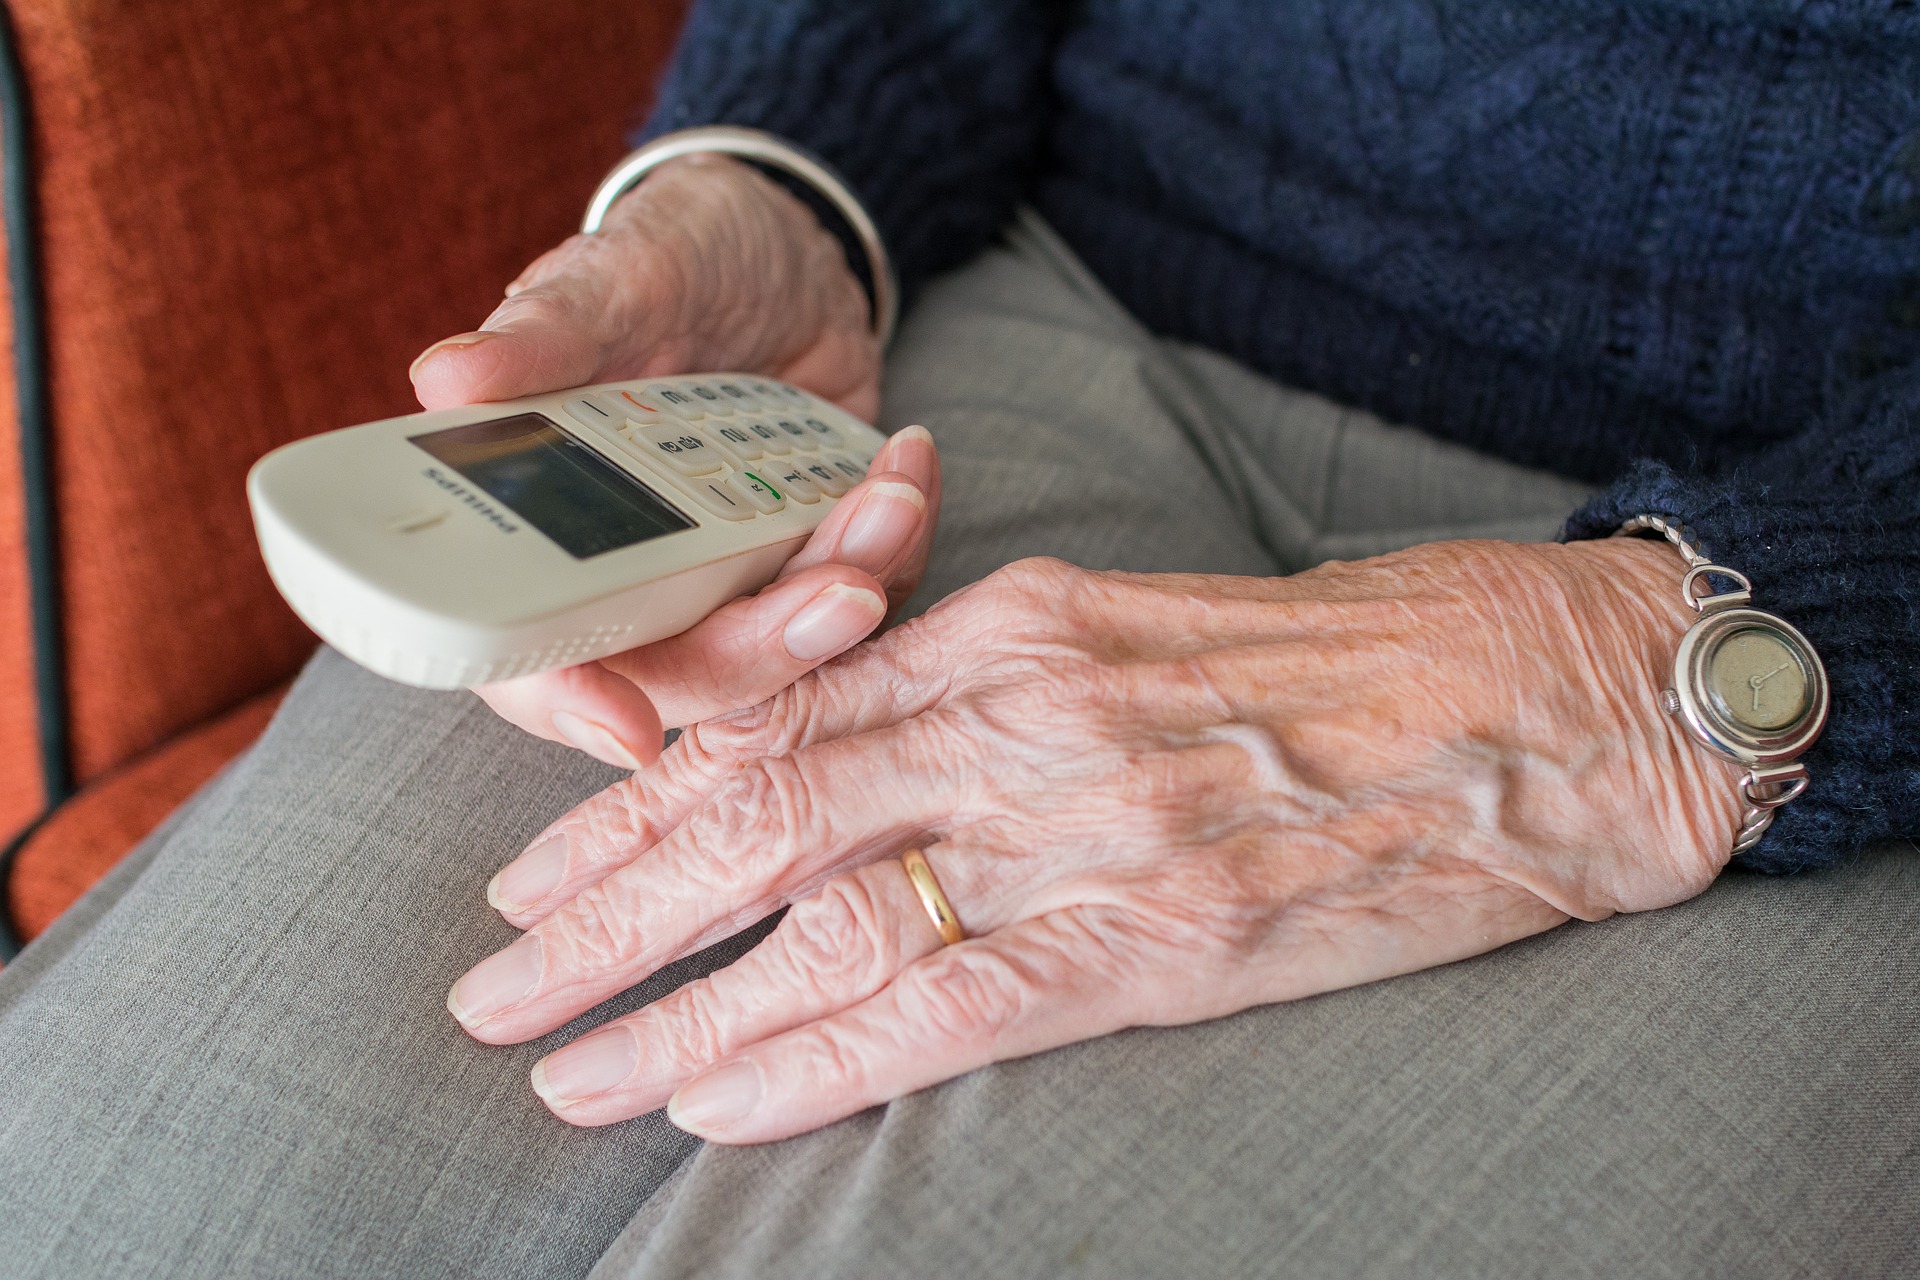 Older person hand and phone